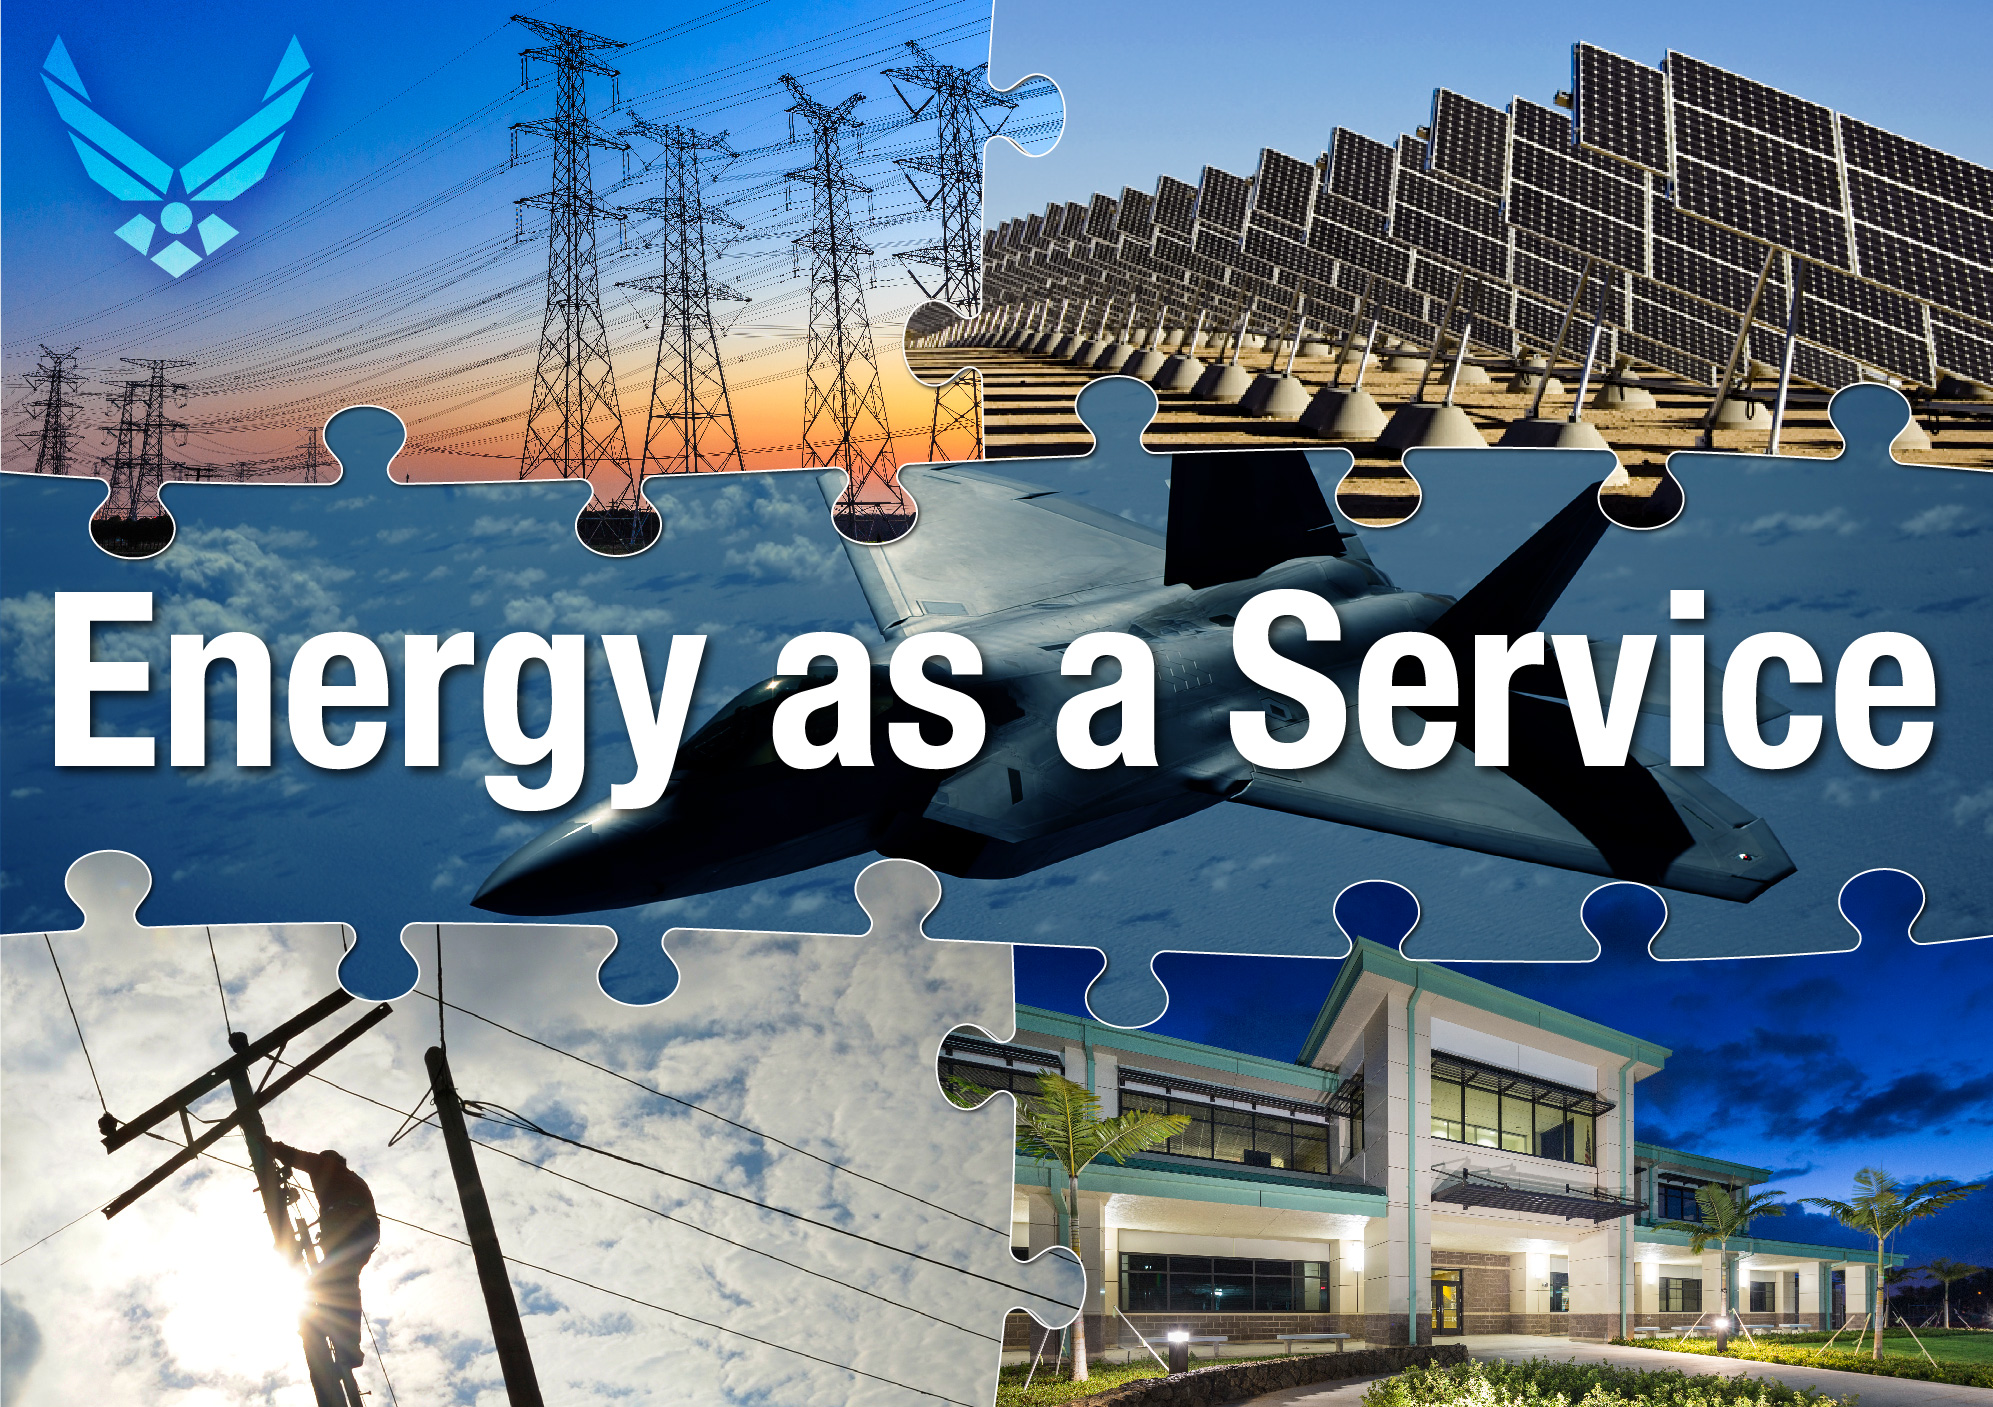 Puzzle Graphic with images of energy including solar array, power lines, and lit building with the phrase Energy as a Service